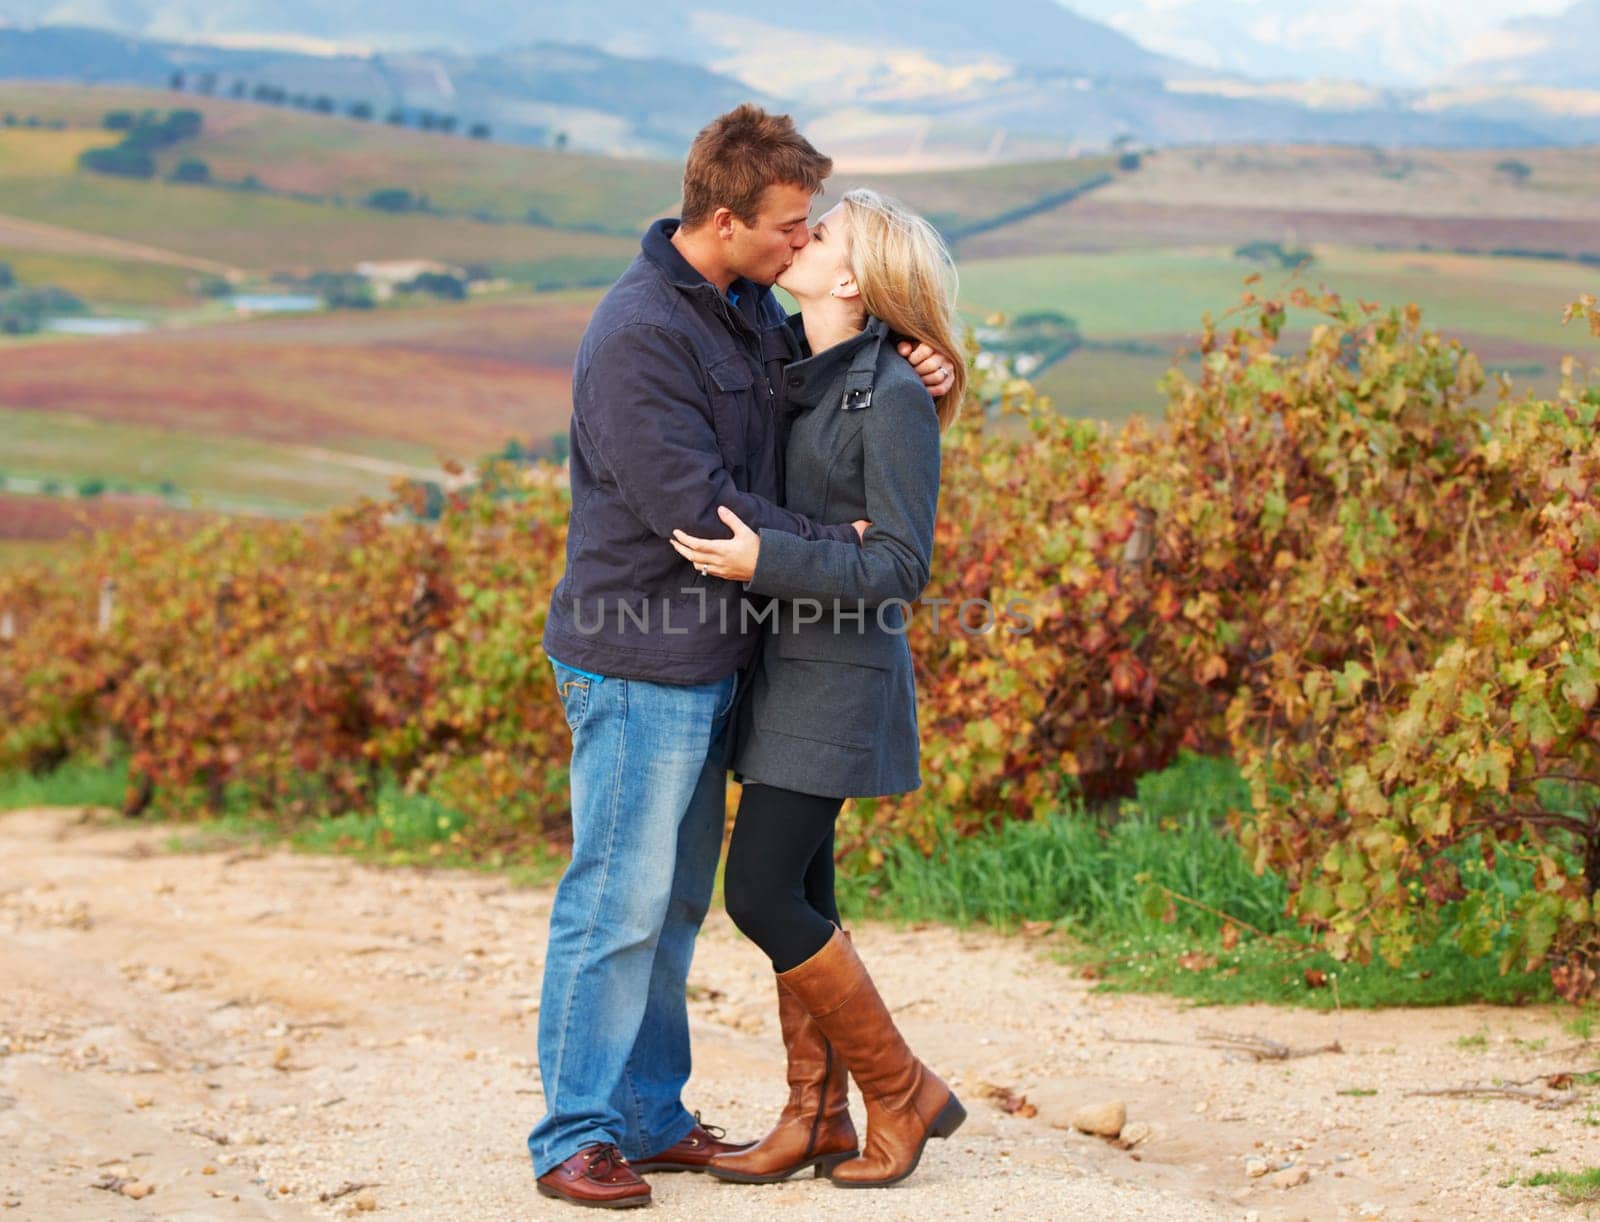 Love, romance and couple kissing in a vineyard outdoor while on a date in celebration of their relationship. Romantic, dating or kiss with a man and woman on a farm for agriculture or sustainability.